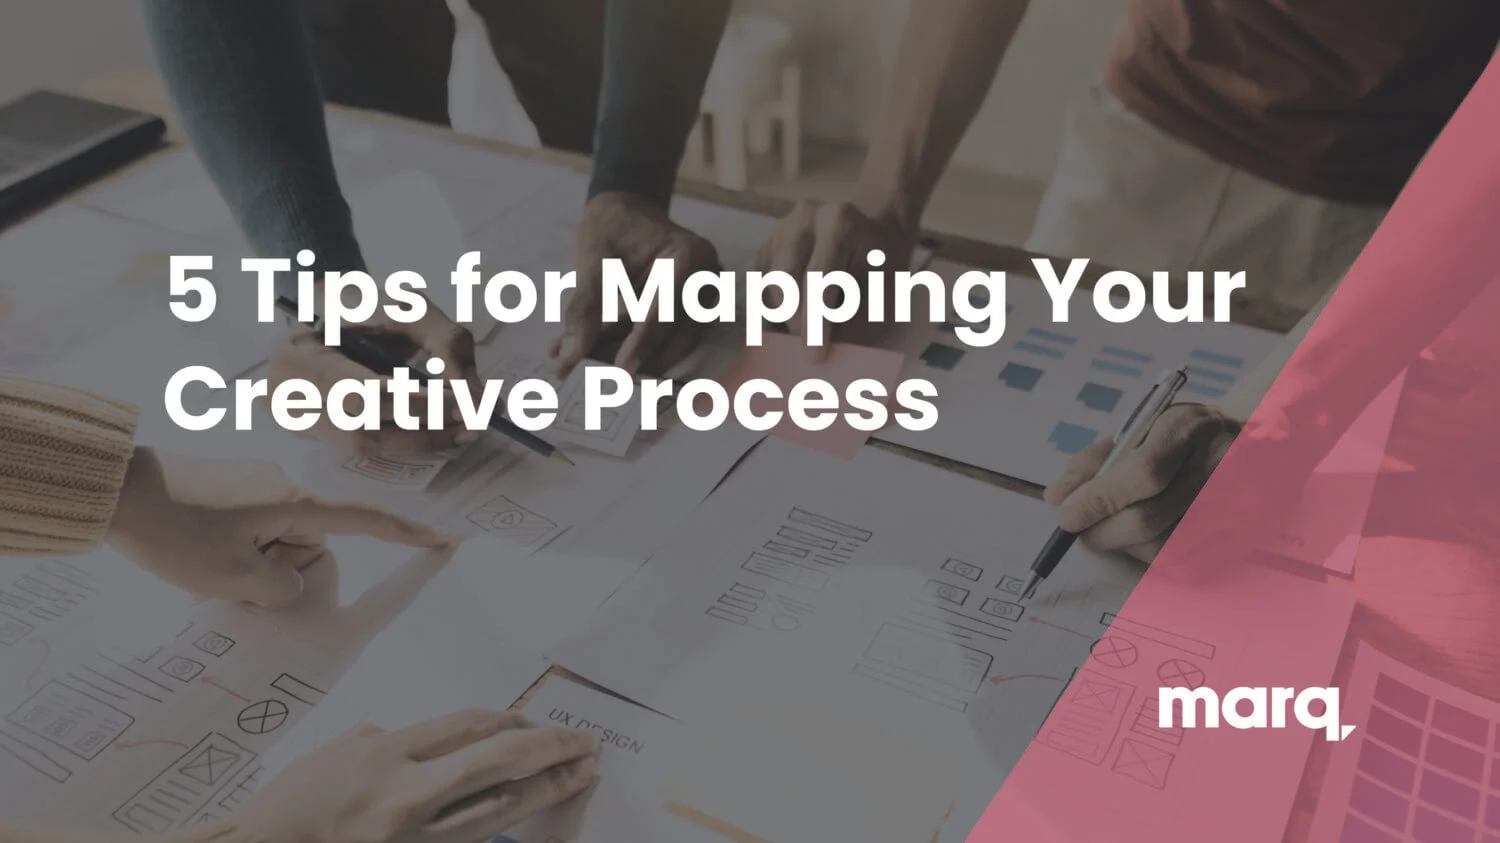 5 Tips for Mapping Your Creative Process